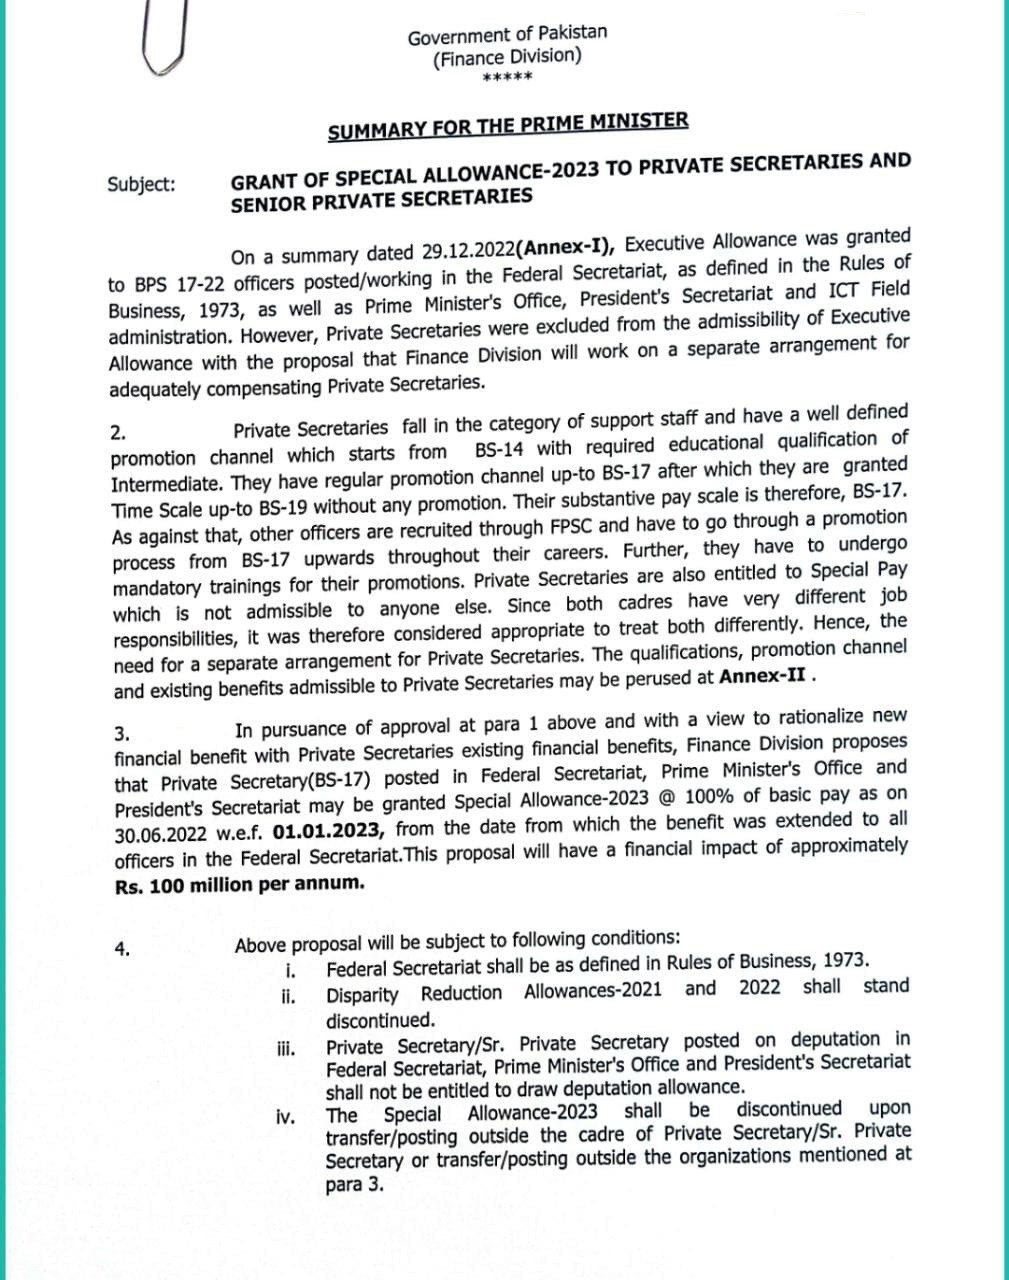 Summary for PM Grant of Special Allowance @ 100% to Private Secretaries BPS-17